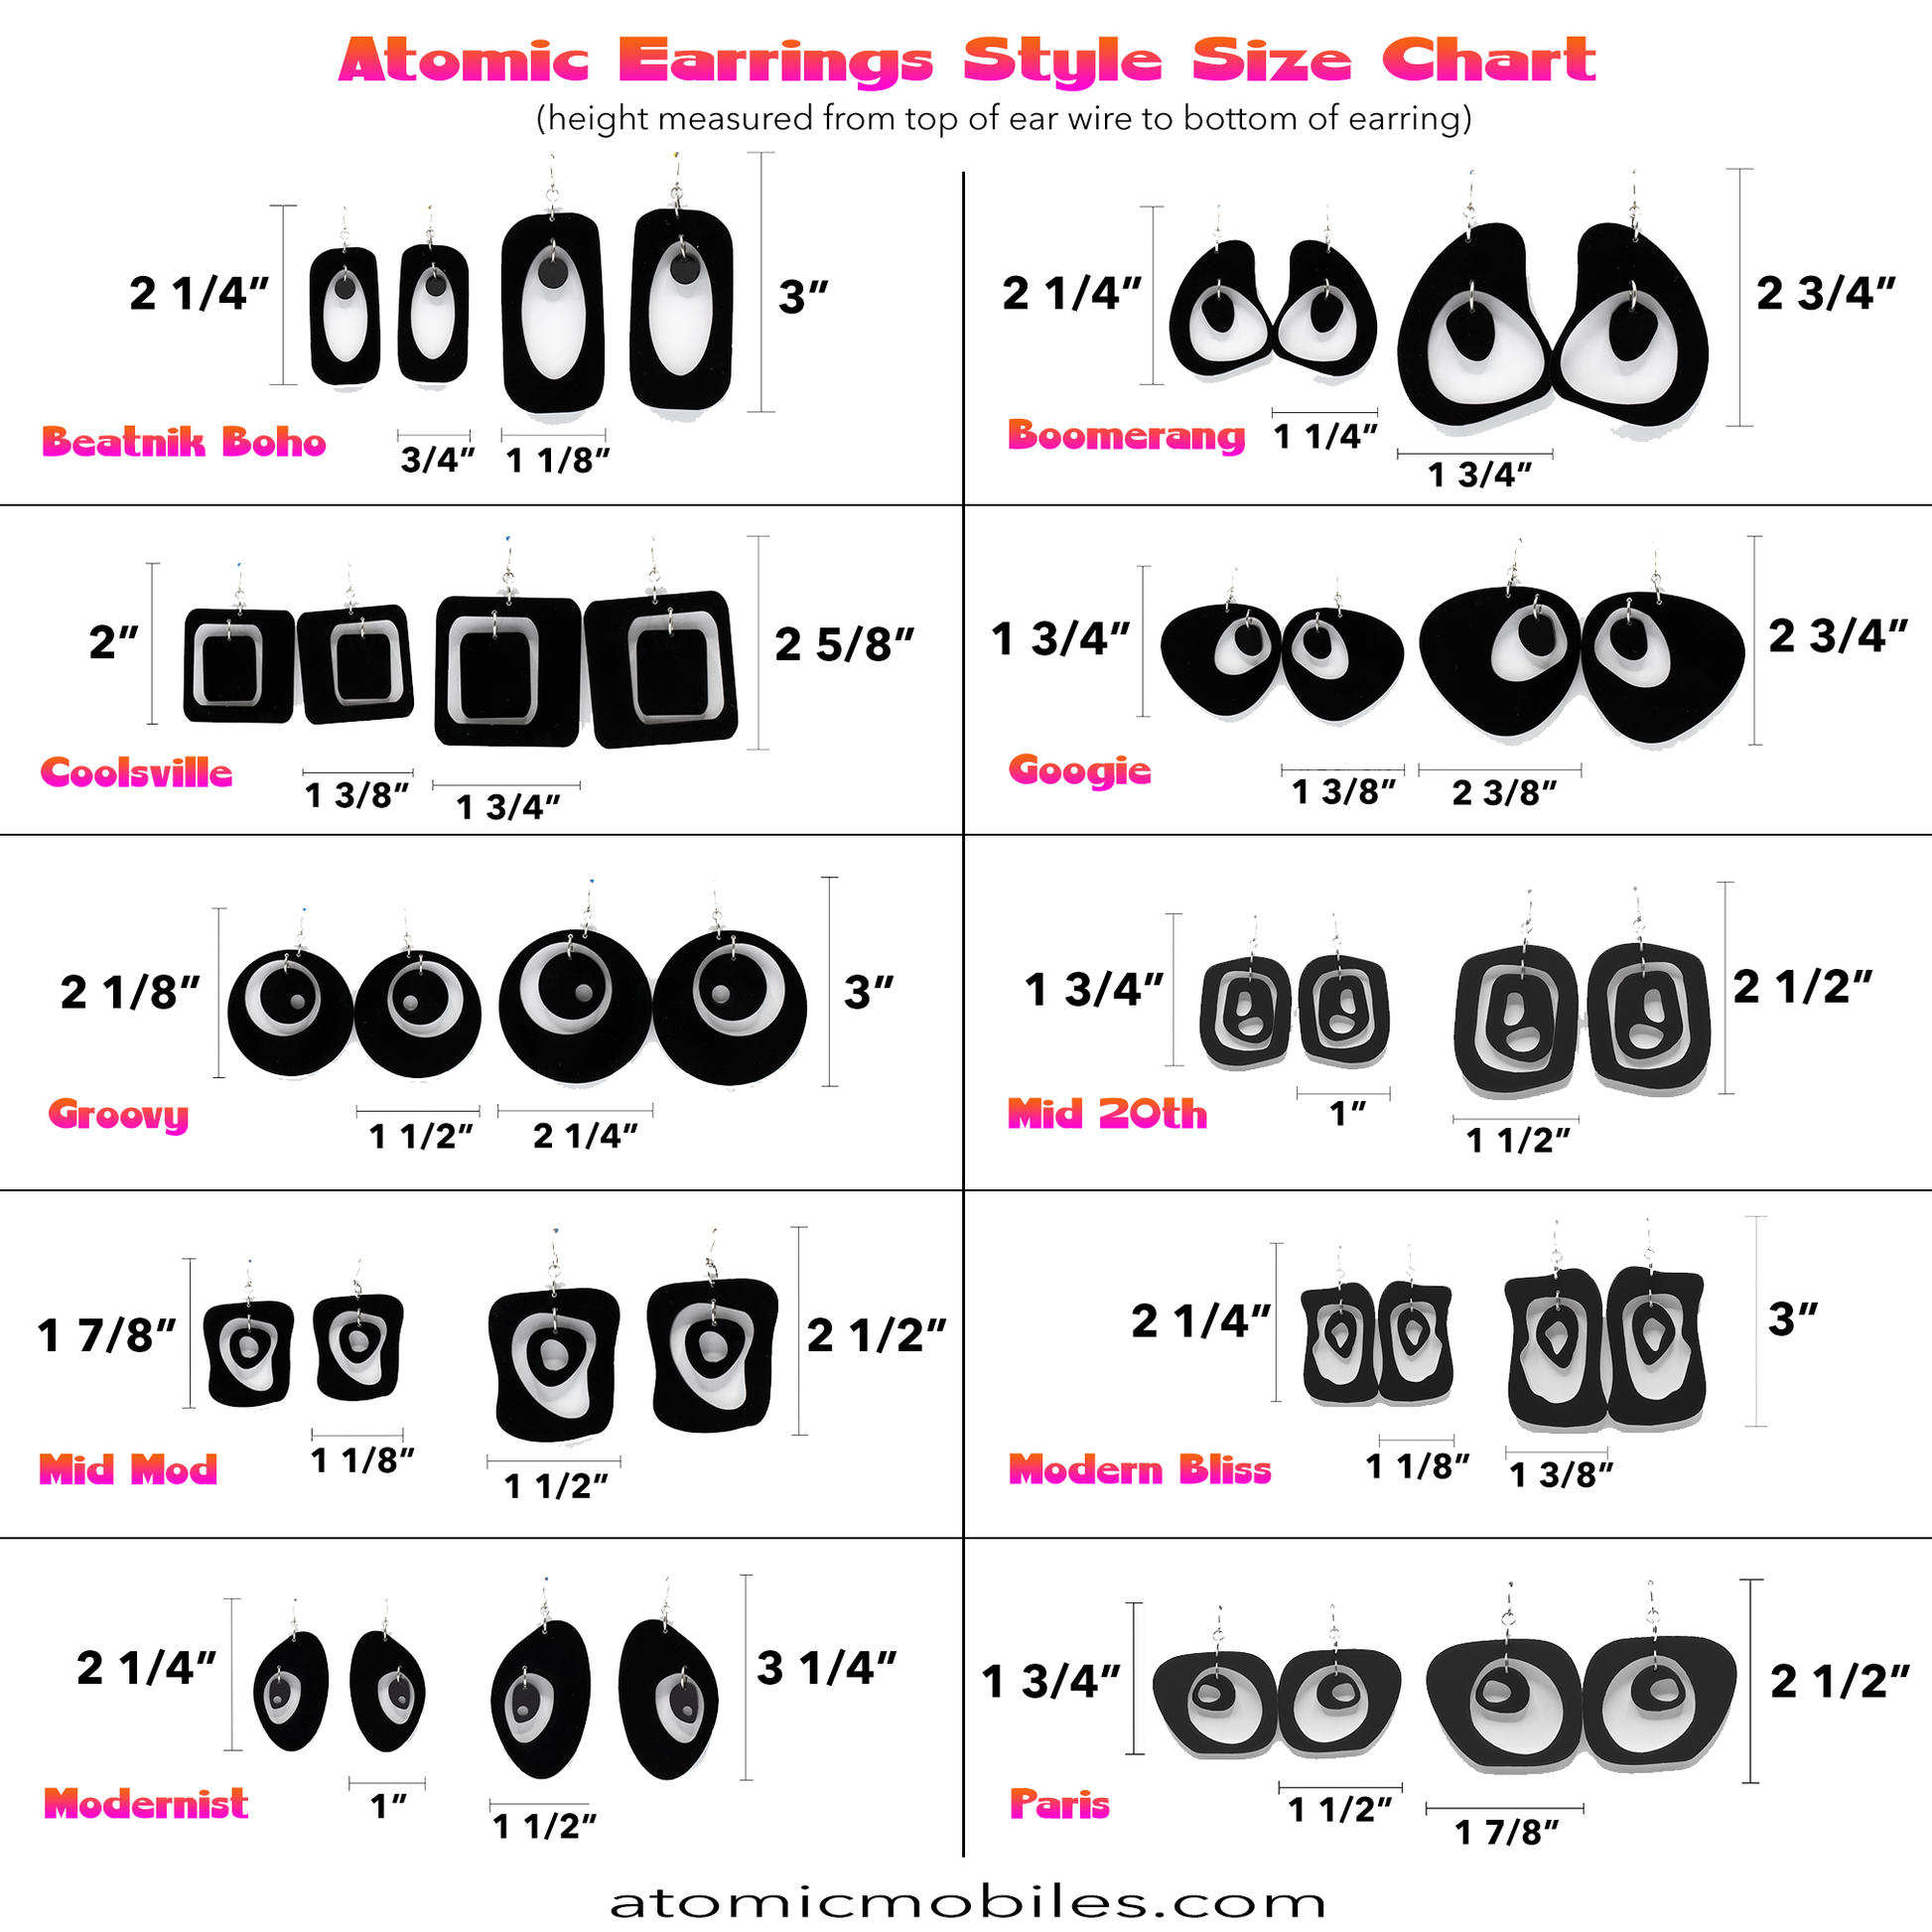 Atomic Earring Style Size Chart for 10 retro styles of statement earrings by AtomicMobiles.com